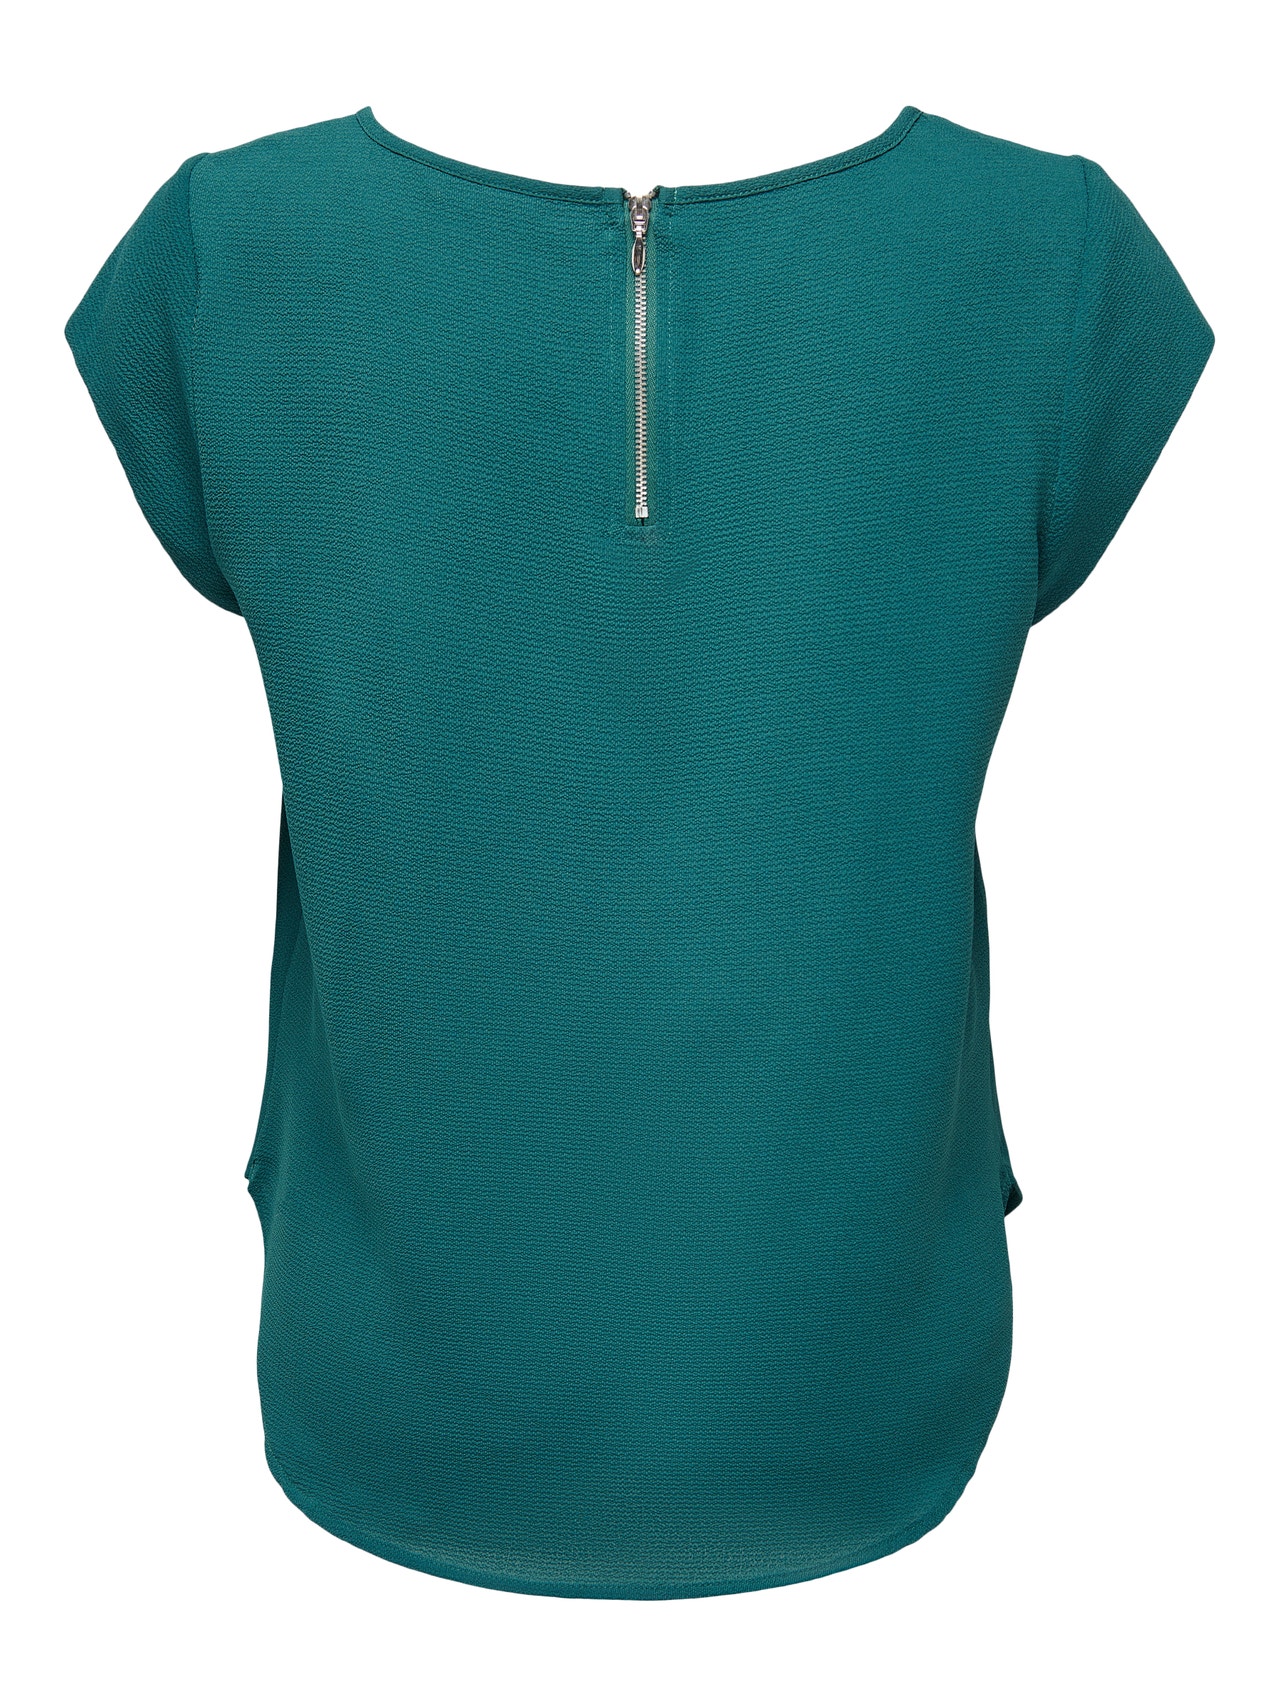 ONLY Regular Fit Round Neck Top -Deep Teal - 15142784